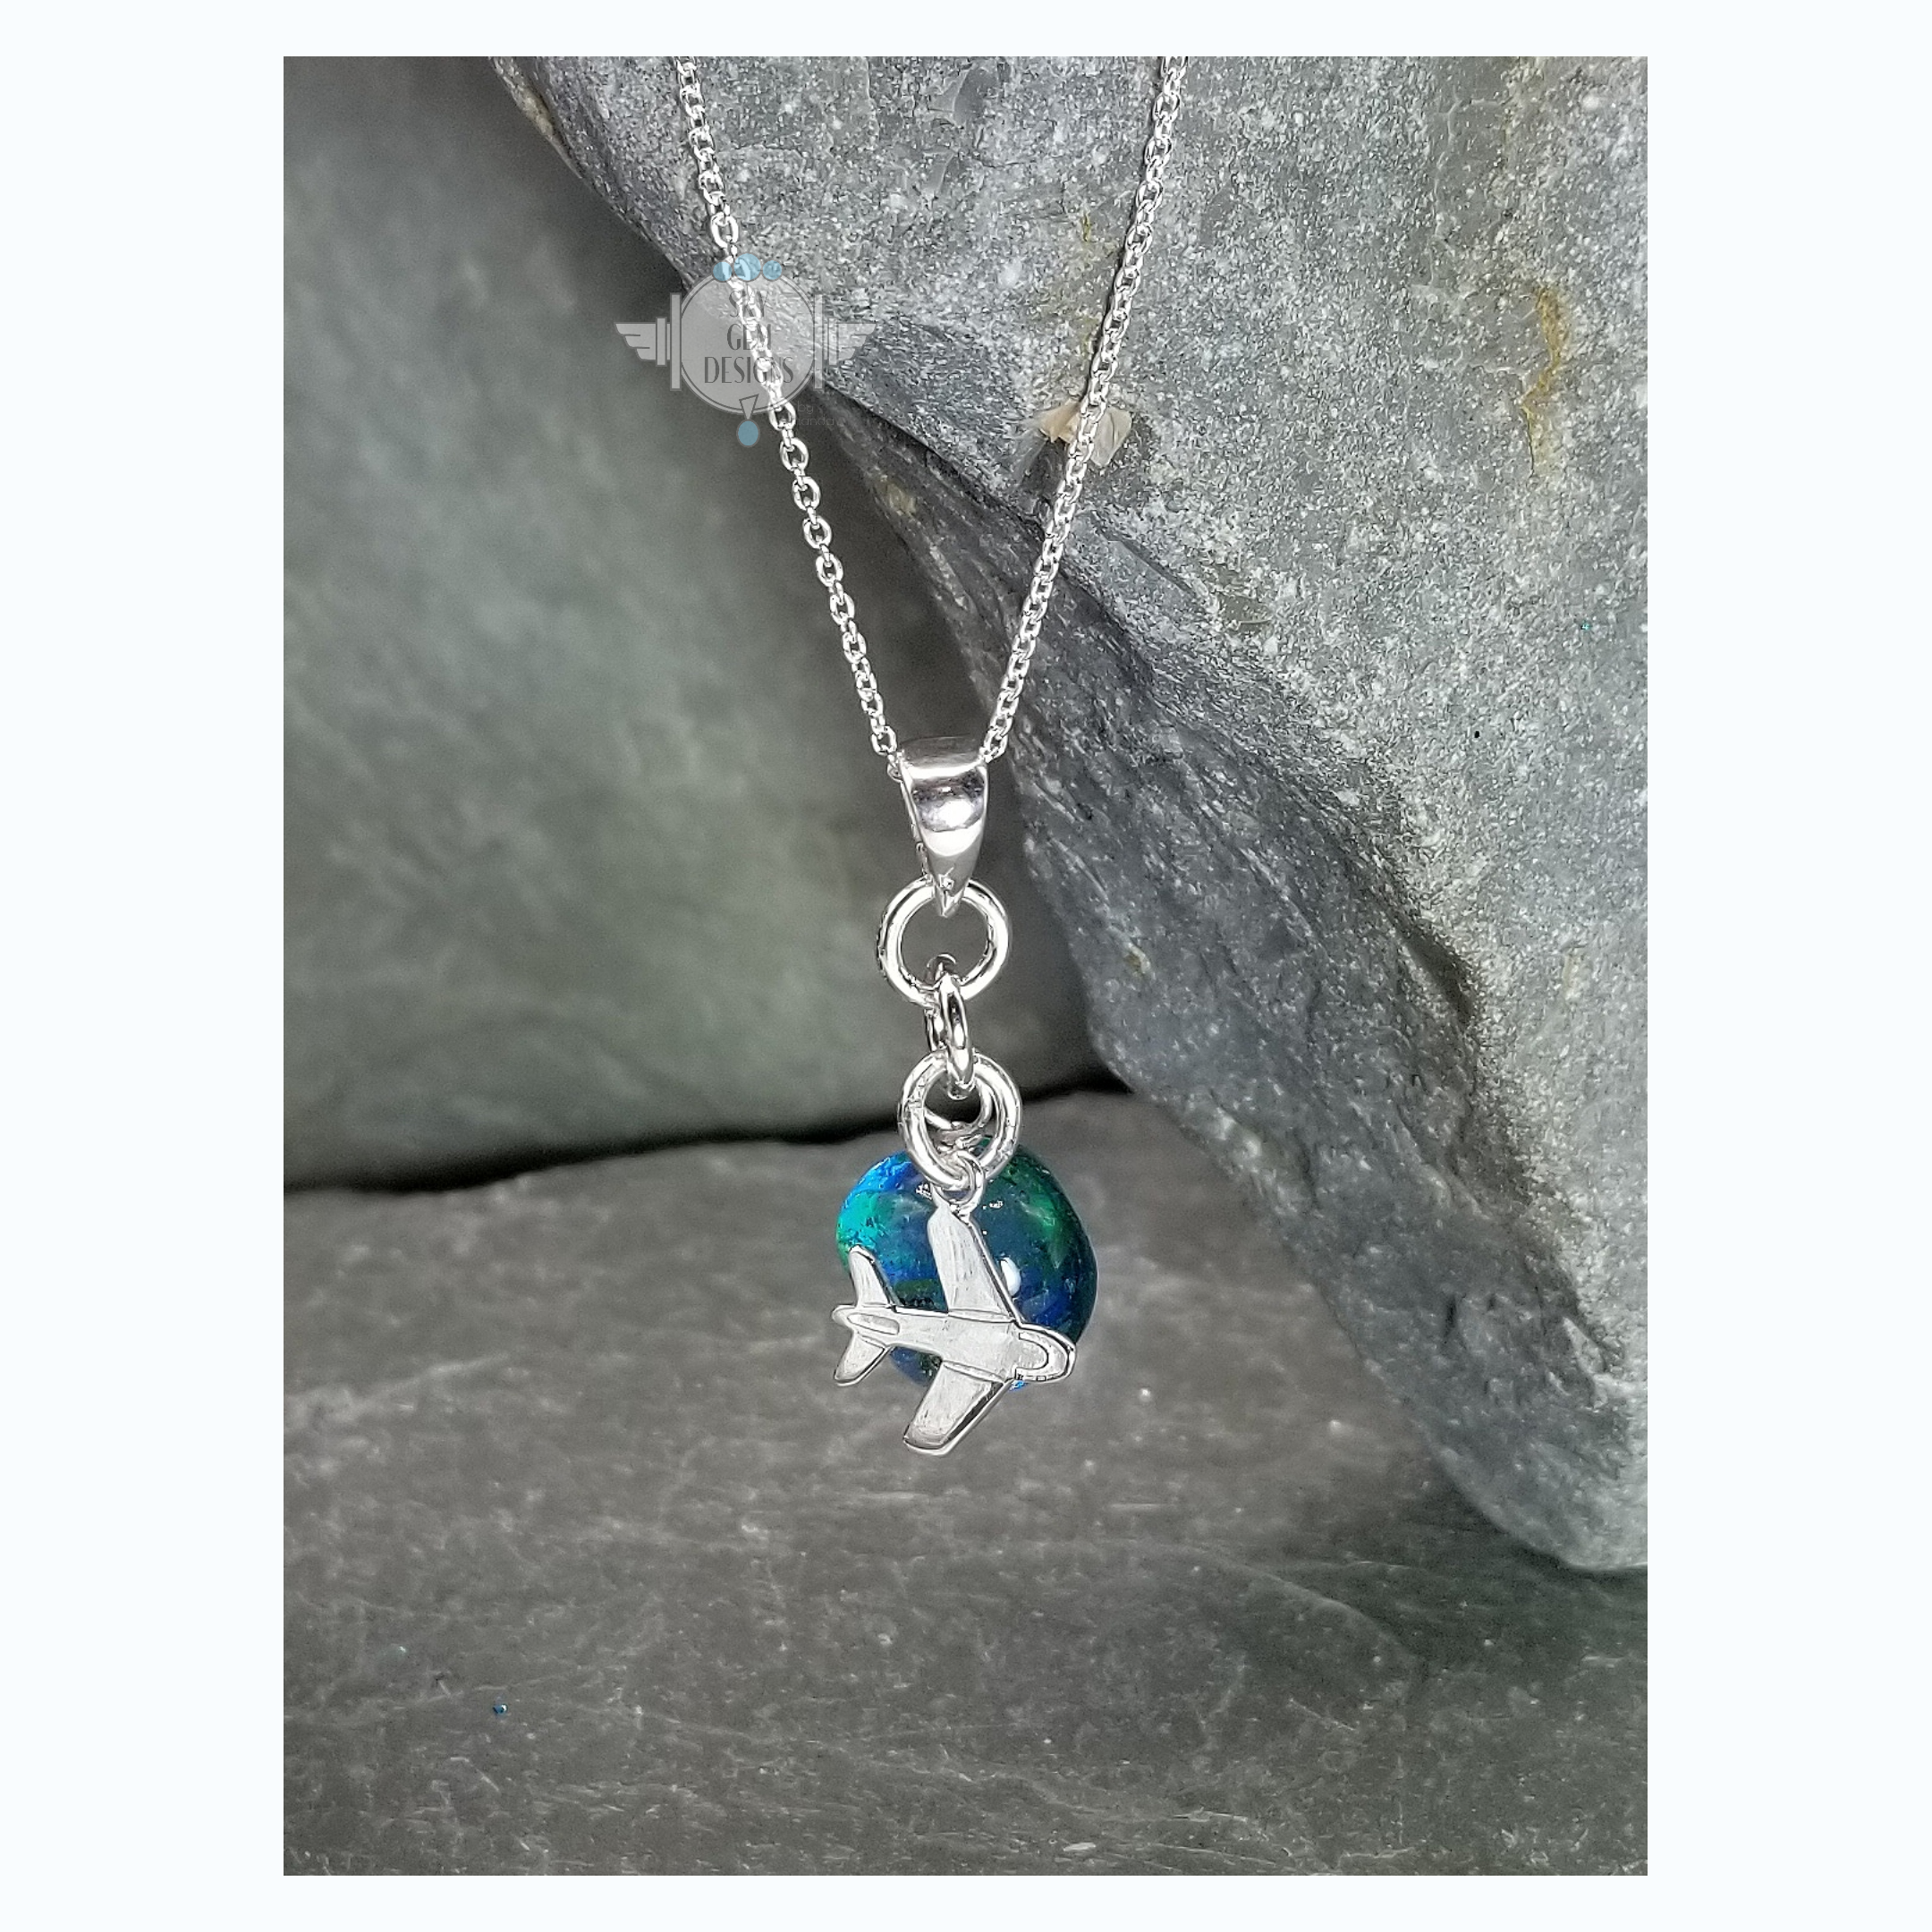 MURANO GLASS TEAL WITH AIRPLANE CHARM NECKLACE